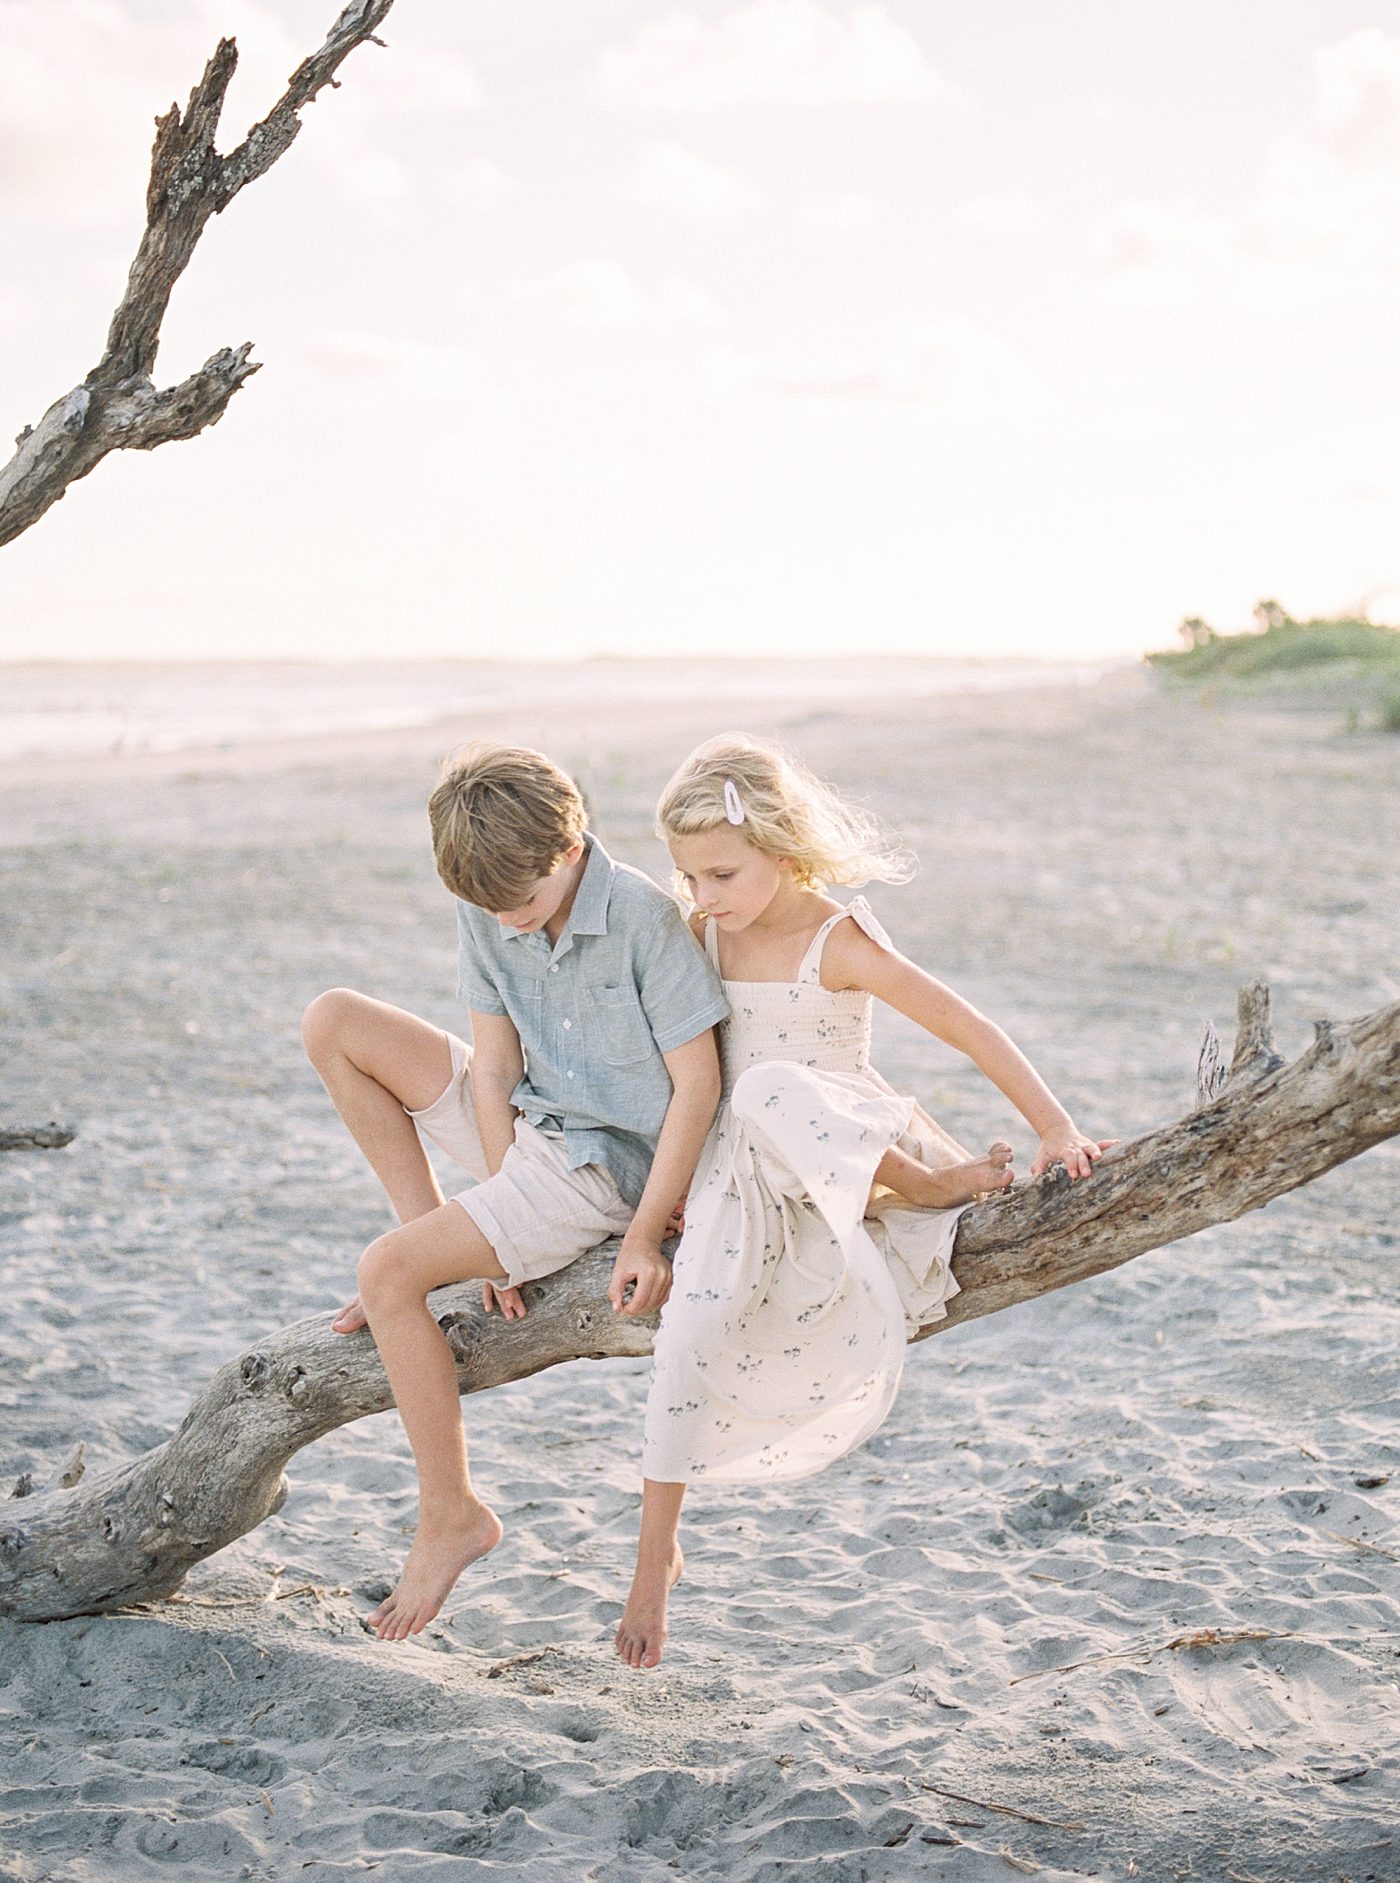 Brother and sister sitting on a fallen tree on the beach | Image by Caitlyn Motycka